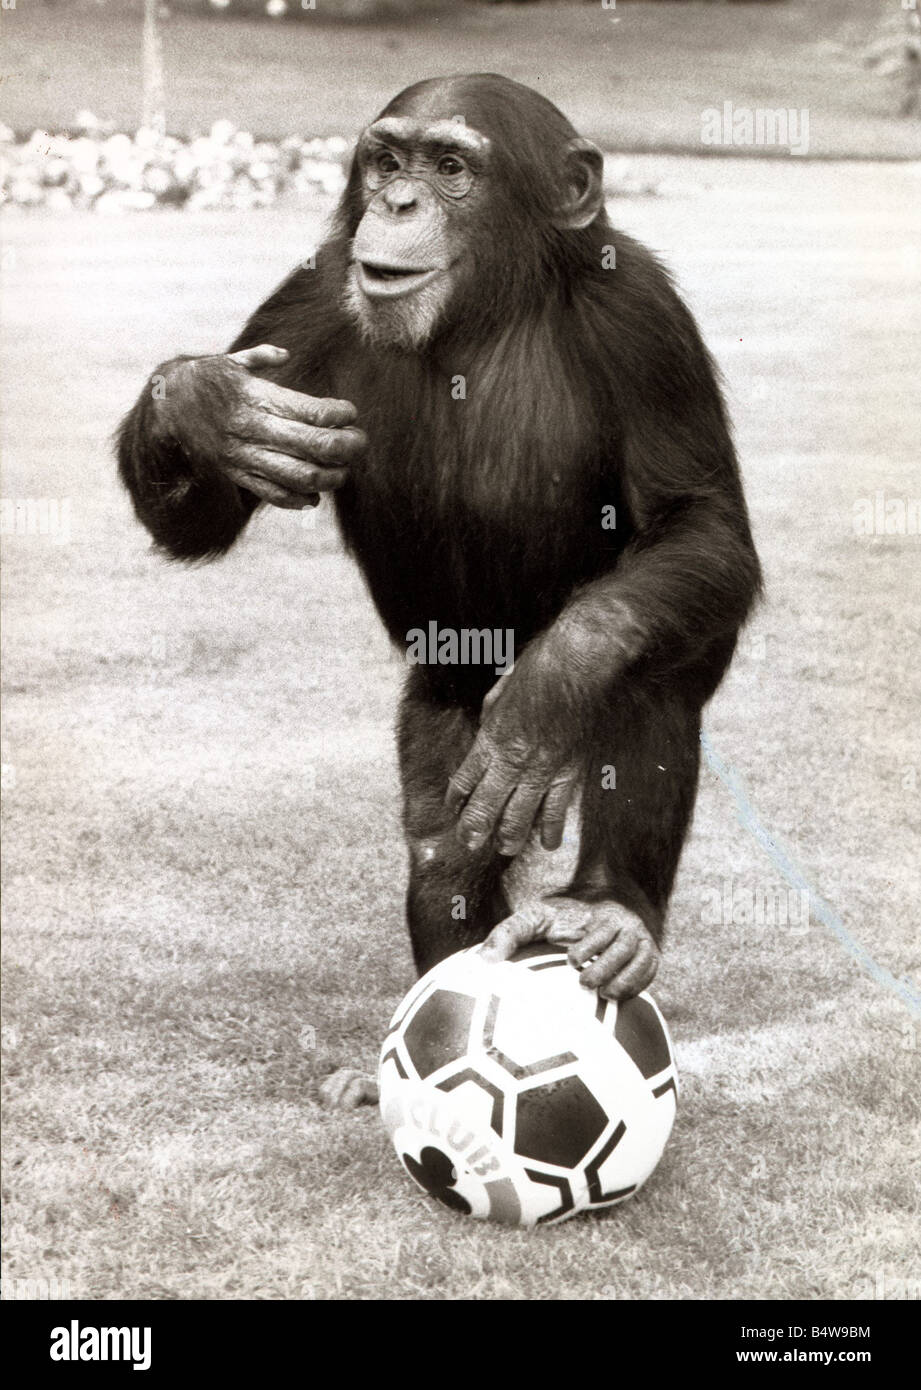 william-the-chimp-with-his-football-at-twycross-zoo-in-leiciestershire-B4W9BM.jpg